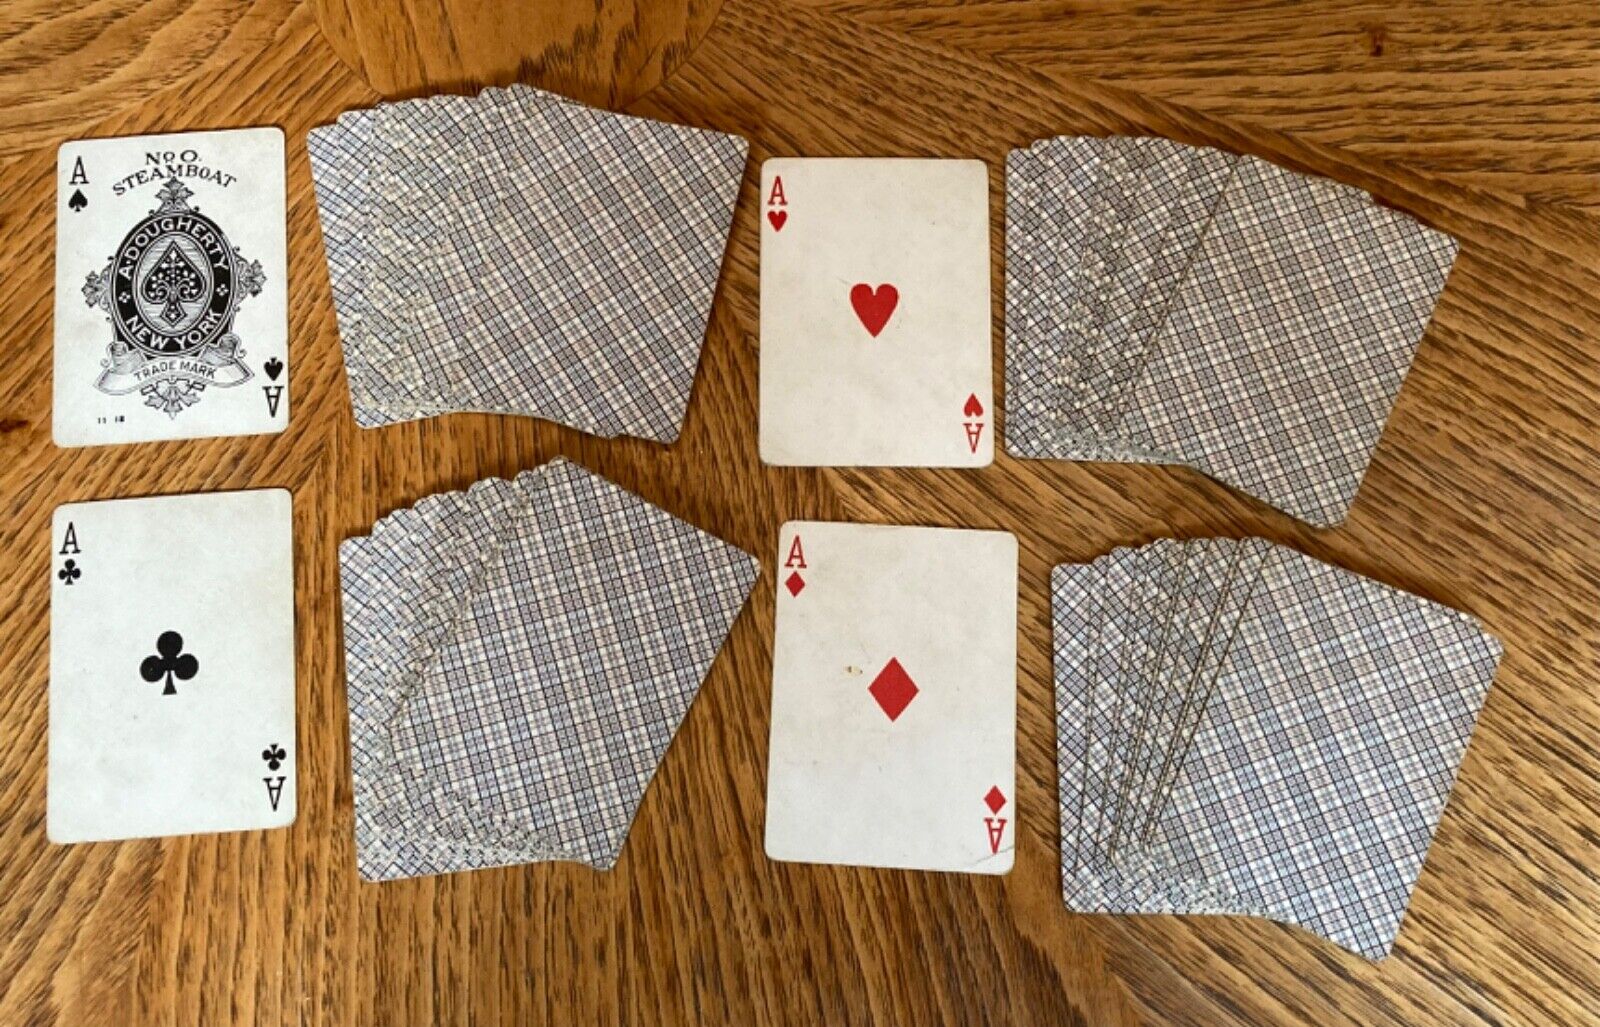 VINTAGE DECK OF PLAYING CARDS STEAMBOAT No. 0  A. DOUGHERTY NEW YORK